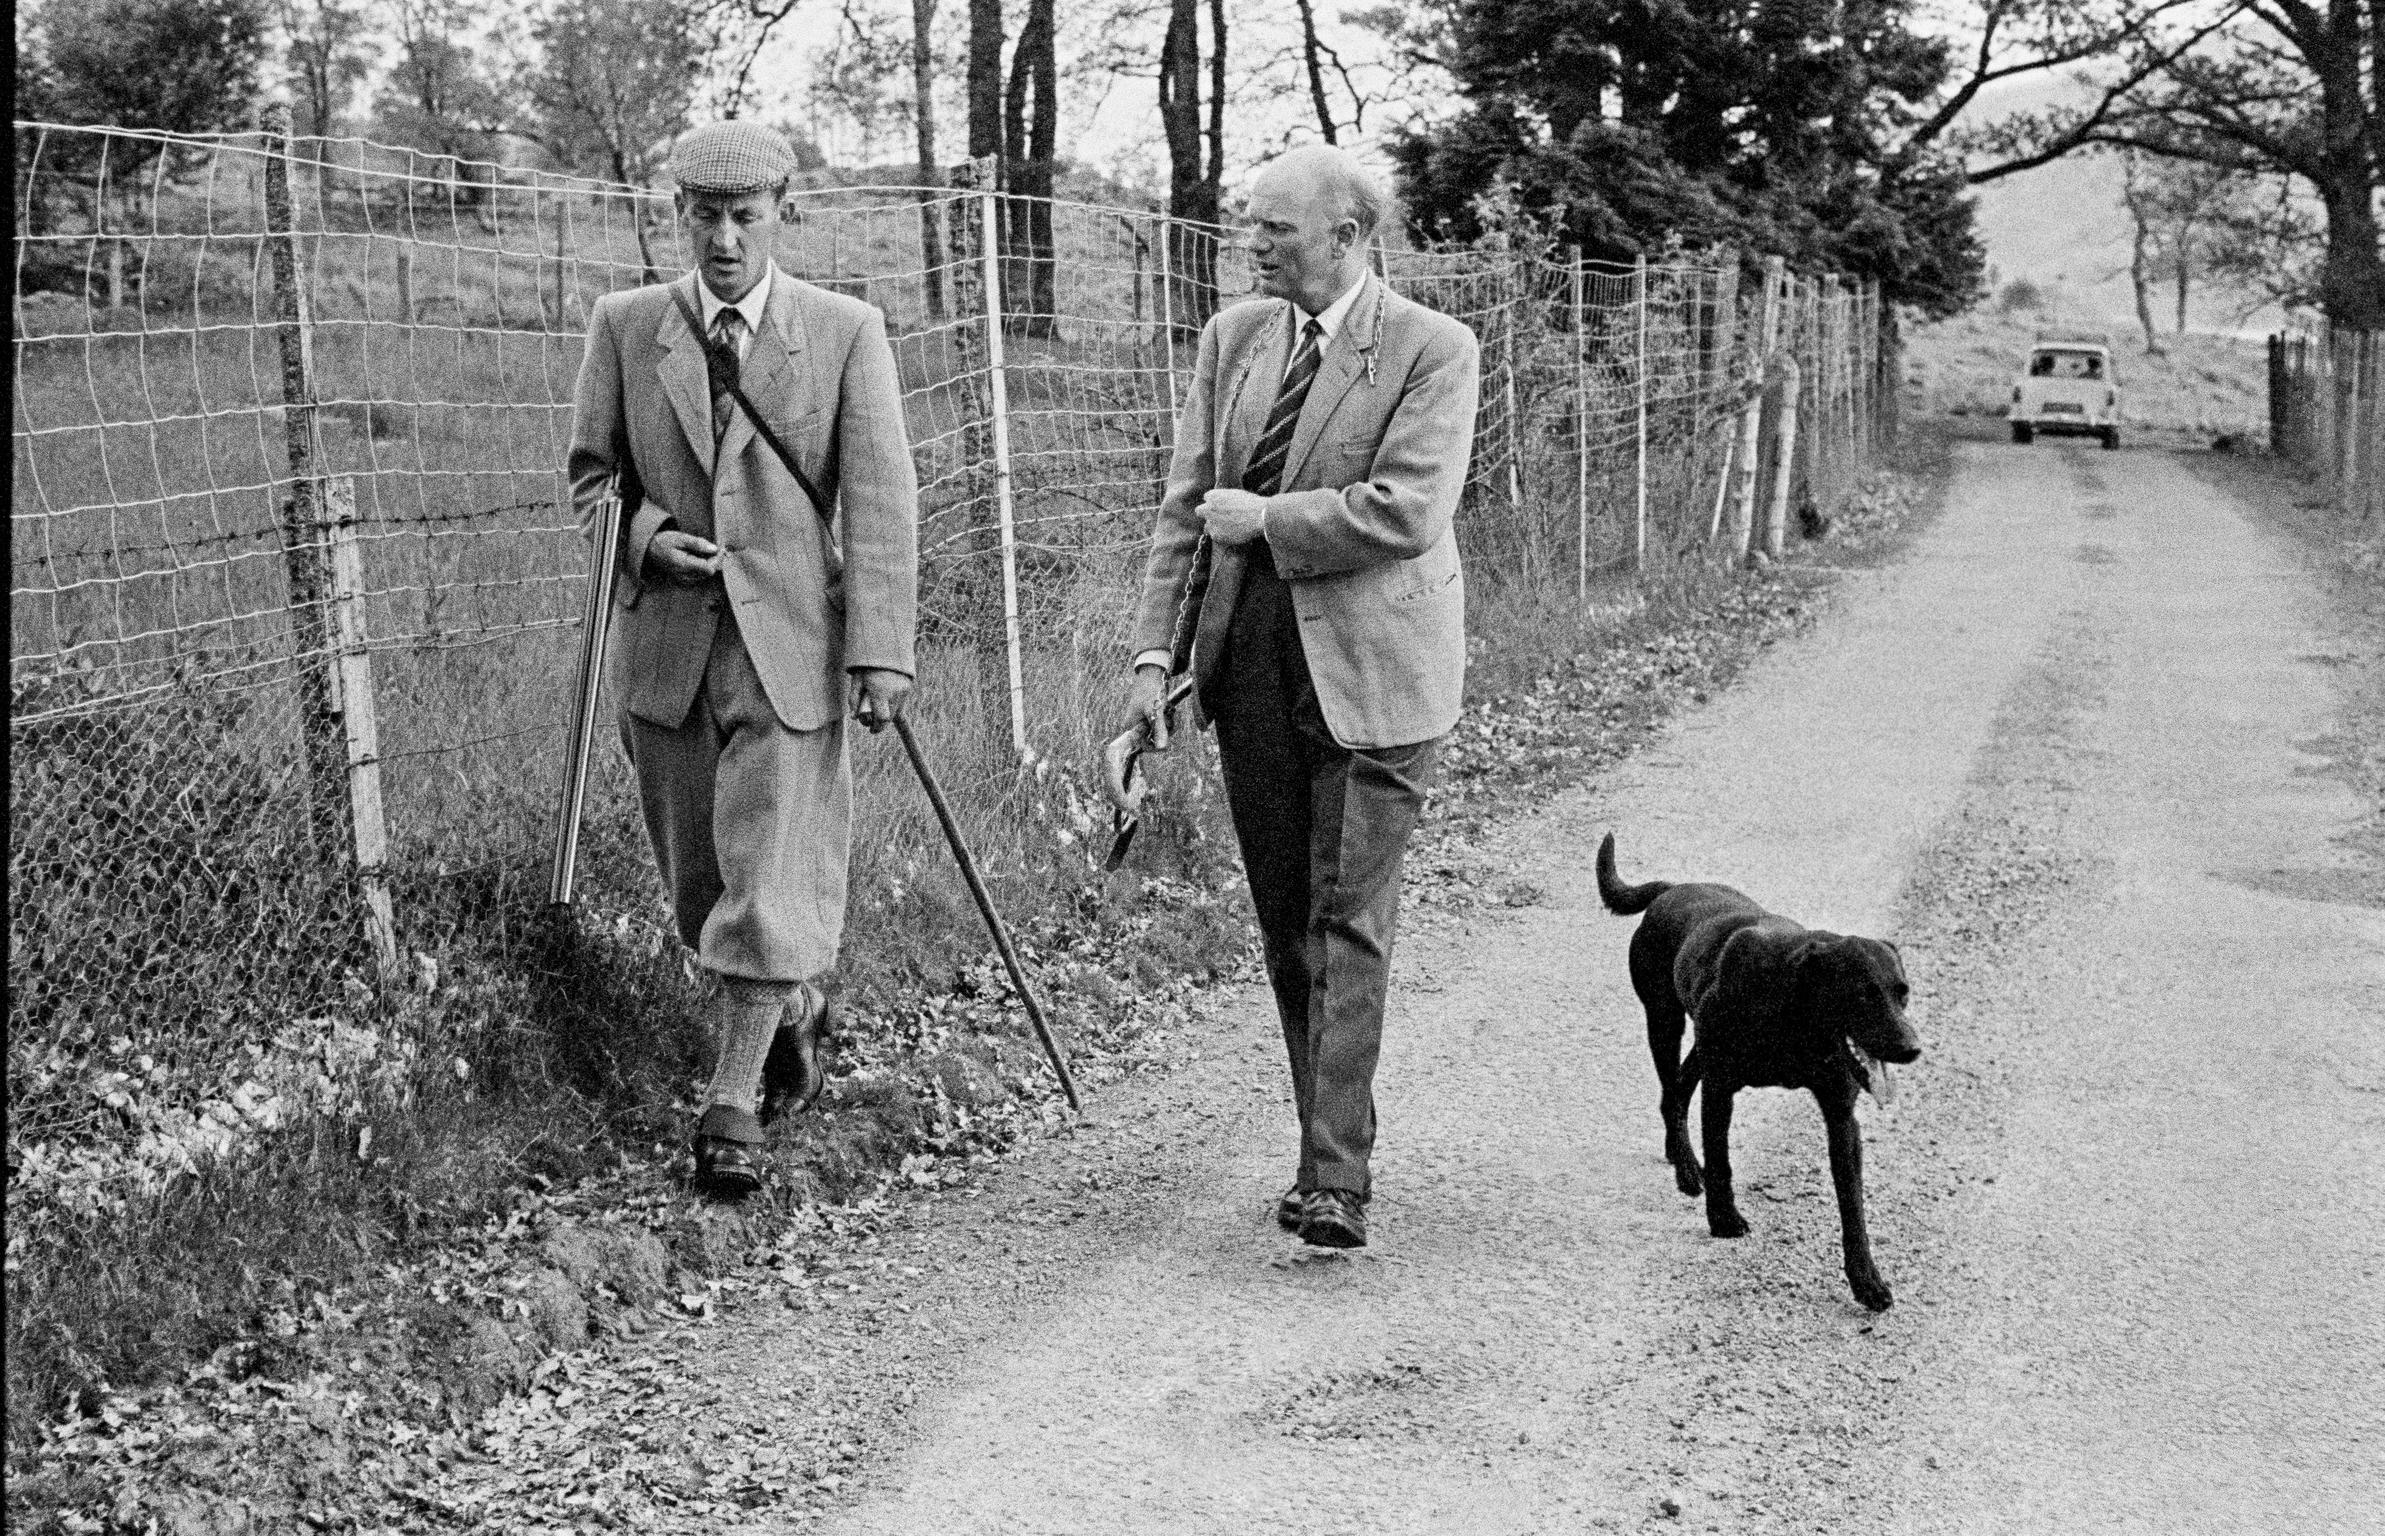 The head of the Clan Cameron of Locheal walks around his estate with his Head Gamekeeper. Scotland